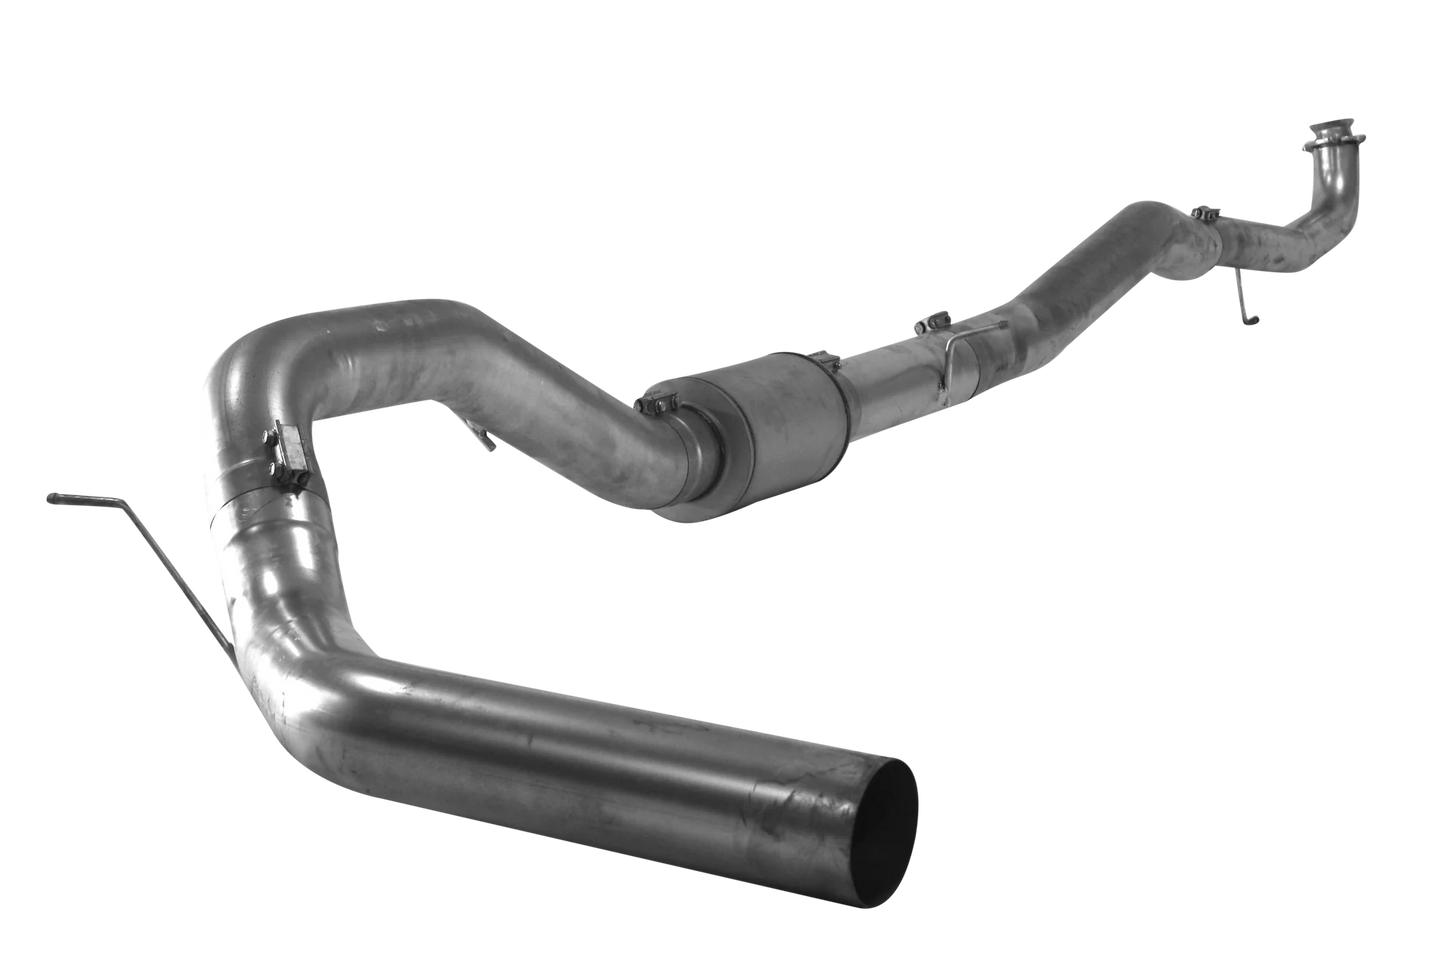 431027 431028 432027 432028 Mel's Manufacturing 4" Downpipe Back Single | 2020-2023 GM 2500/3500 6.6L DURAMAX L5P  Mels Mfg FloPro Flo-Pro Flo Pro Hell On Wheels Performance Ltd Limited Canadian Owned and Operated Online Diesel Parts Distribution & Wholesale Supply Center in Alberta Canada Shipping Supplying to Alberta British Columbia Sask Saskatchewan Manitoba Ontario Quebec Newfoundland Labrador New Brunswick Nova Scotia Prince Edward Island AB BC SK MB ON QC PQ NS NB NFLD N.L. PEI